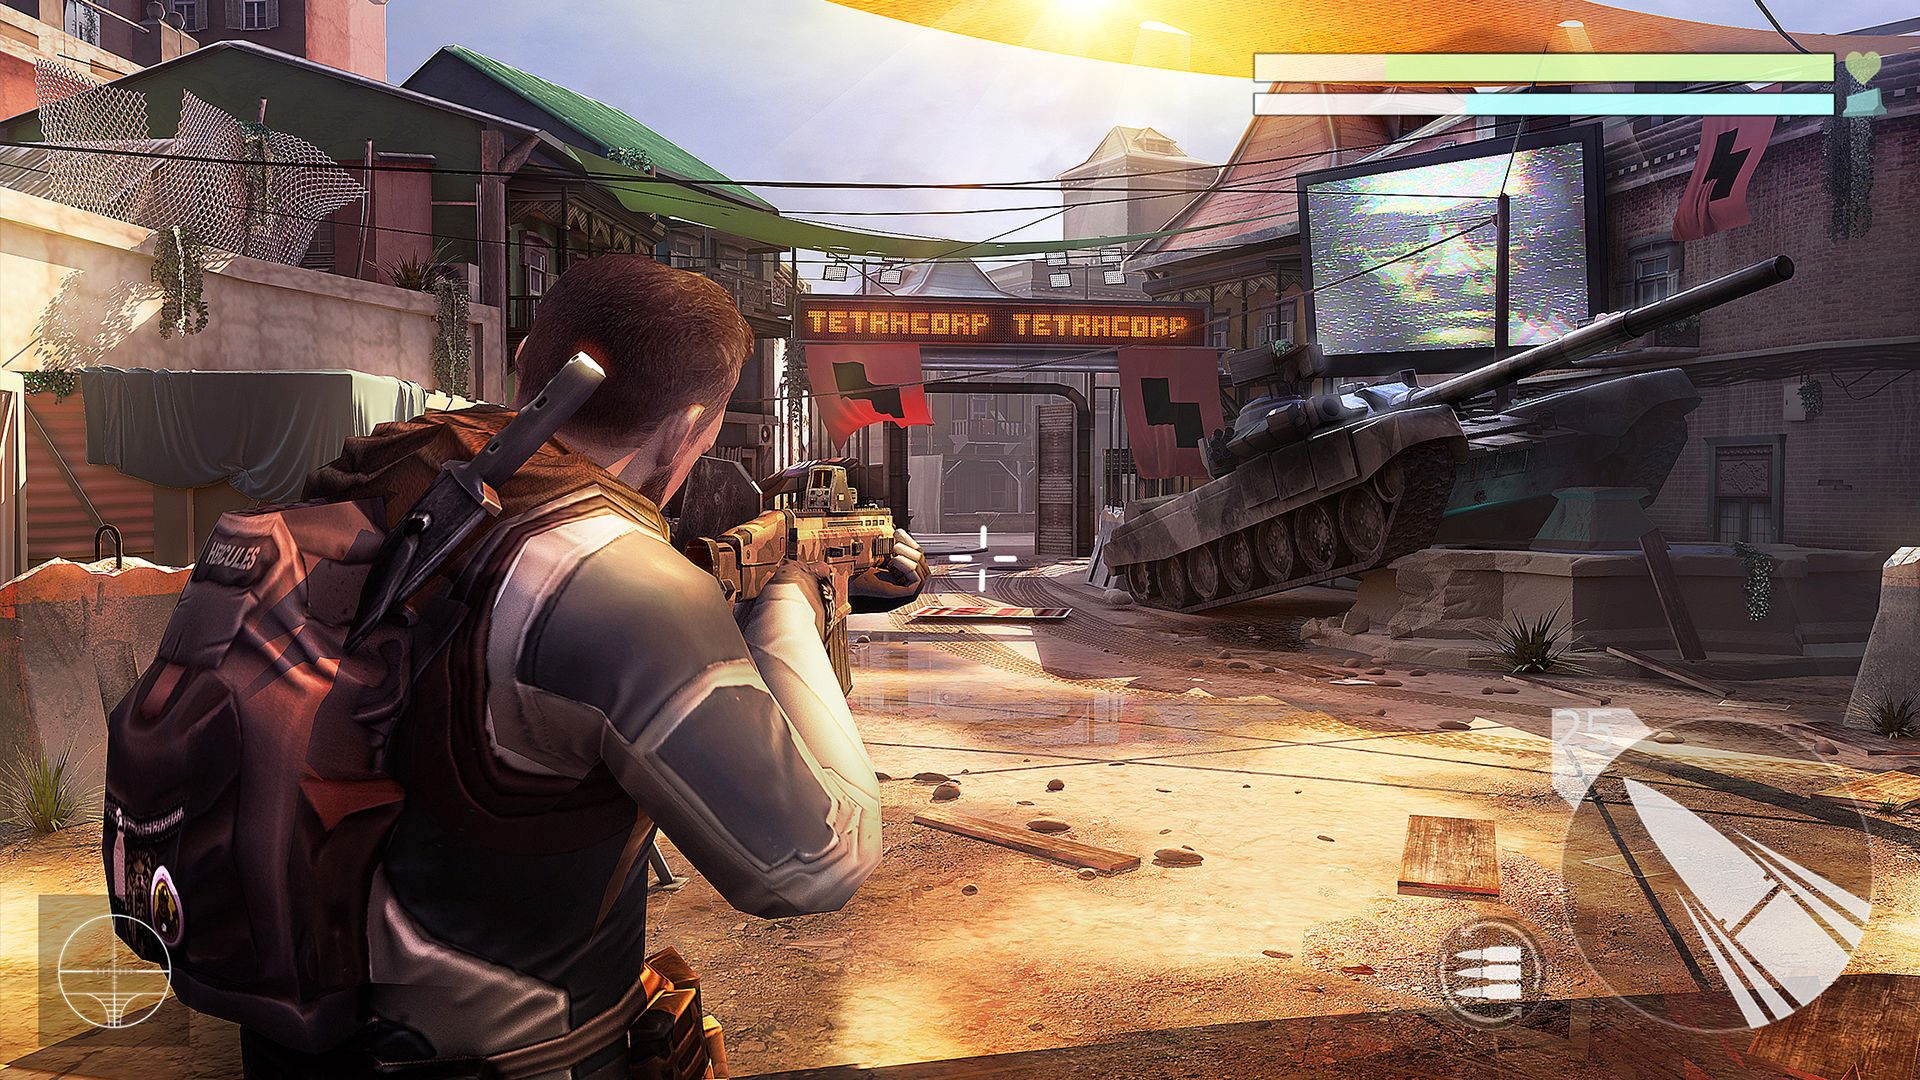 Cover Fire: Shooting Games: Appstore for Android